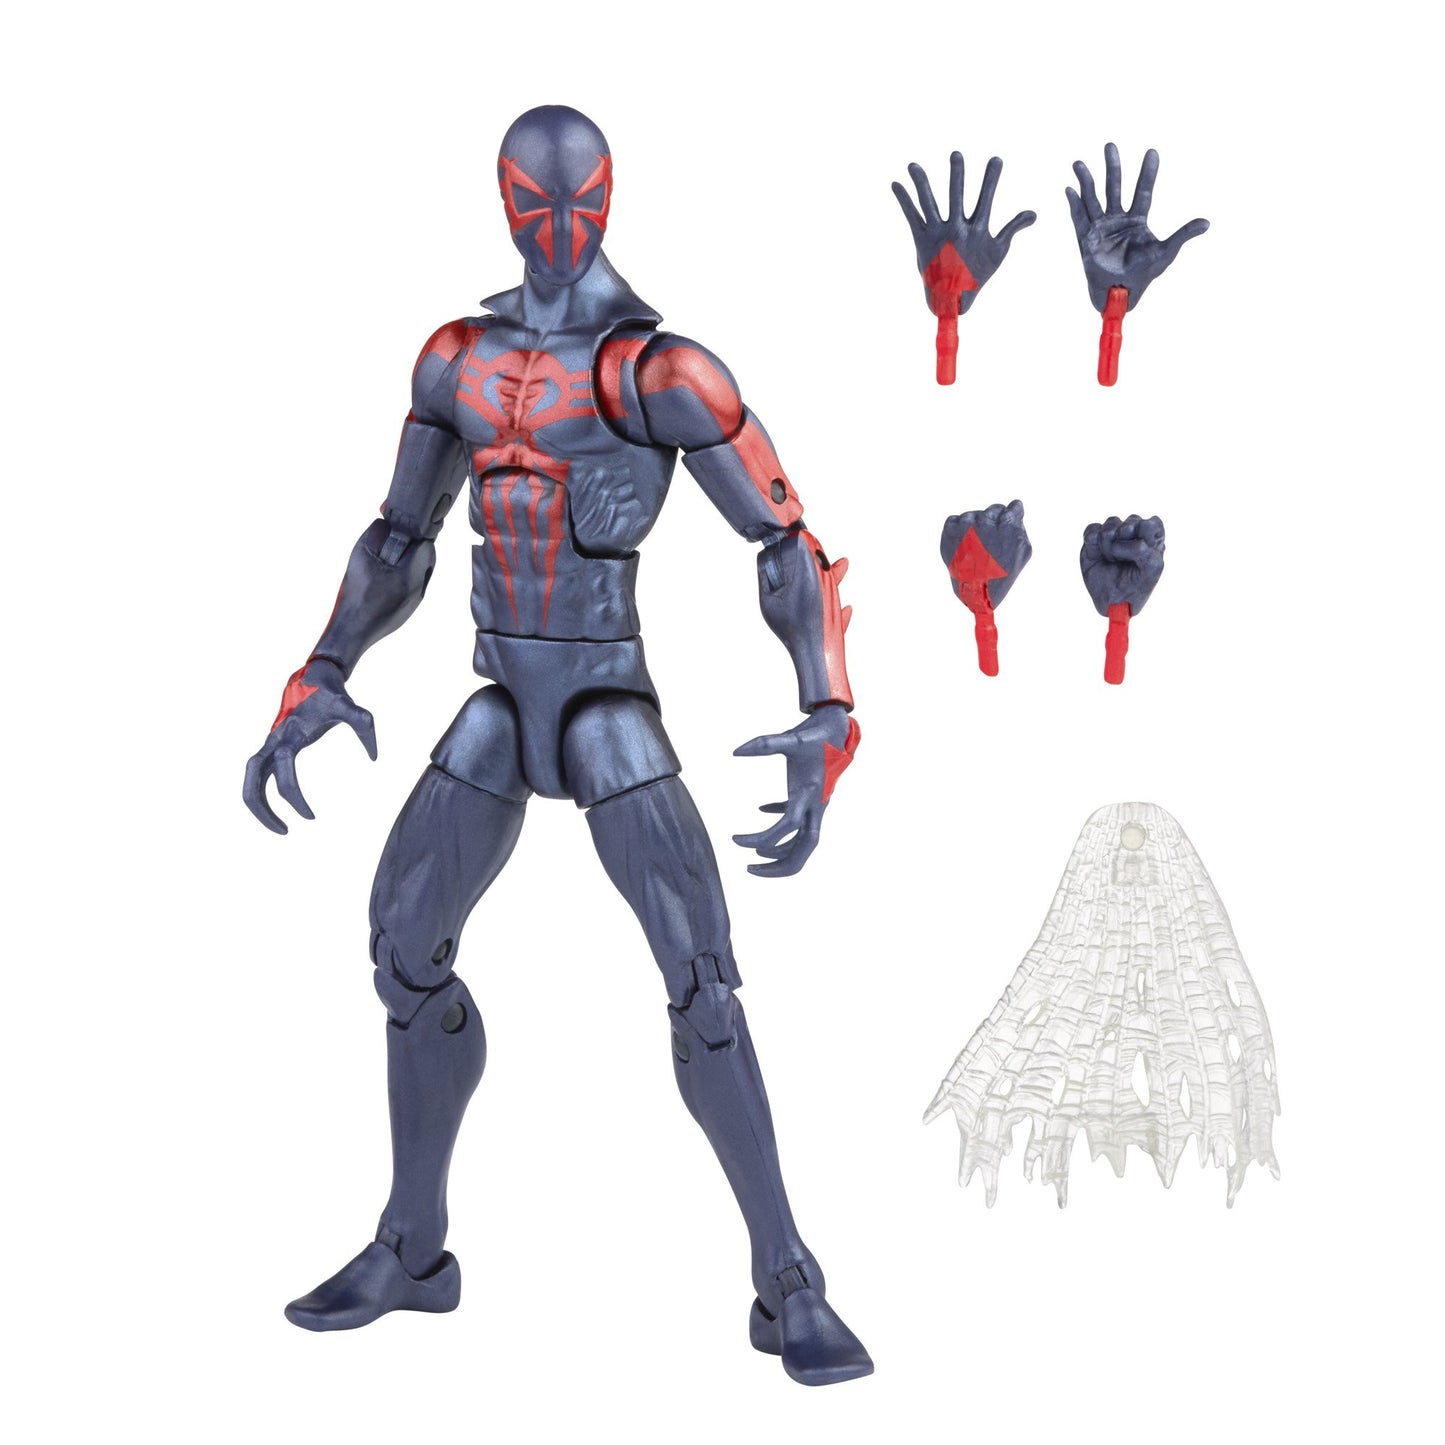 Marvel Legends Series Retro Spider-Man 2099 Miguel O'Hara Figure and accessories